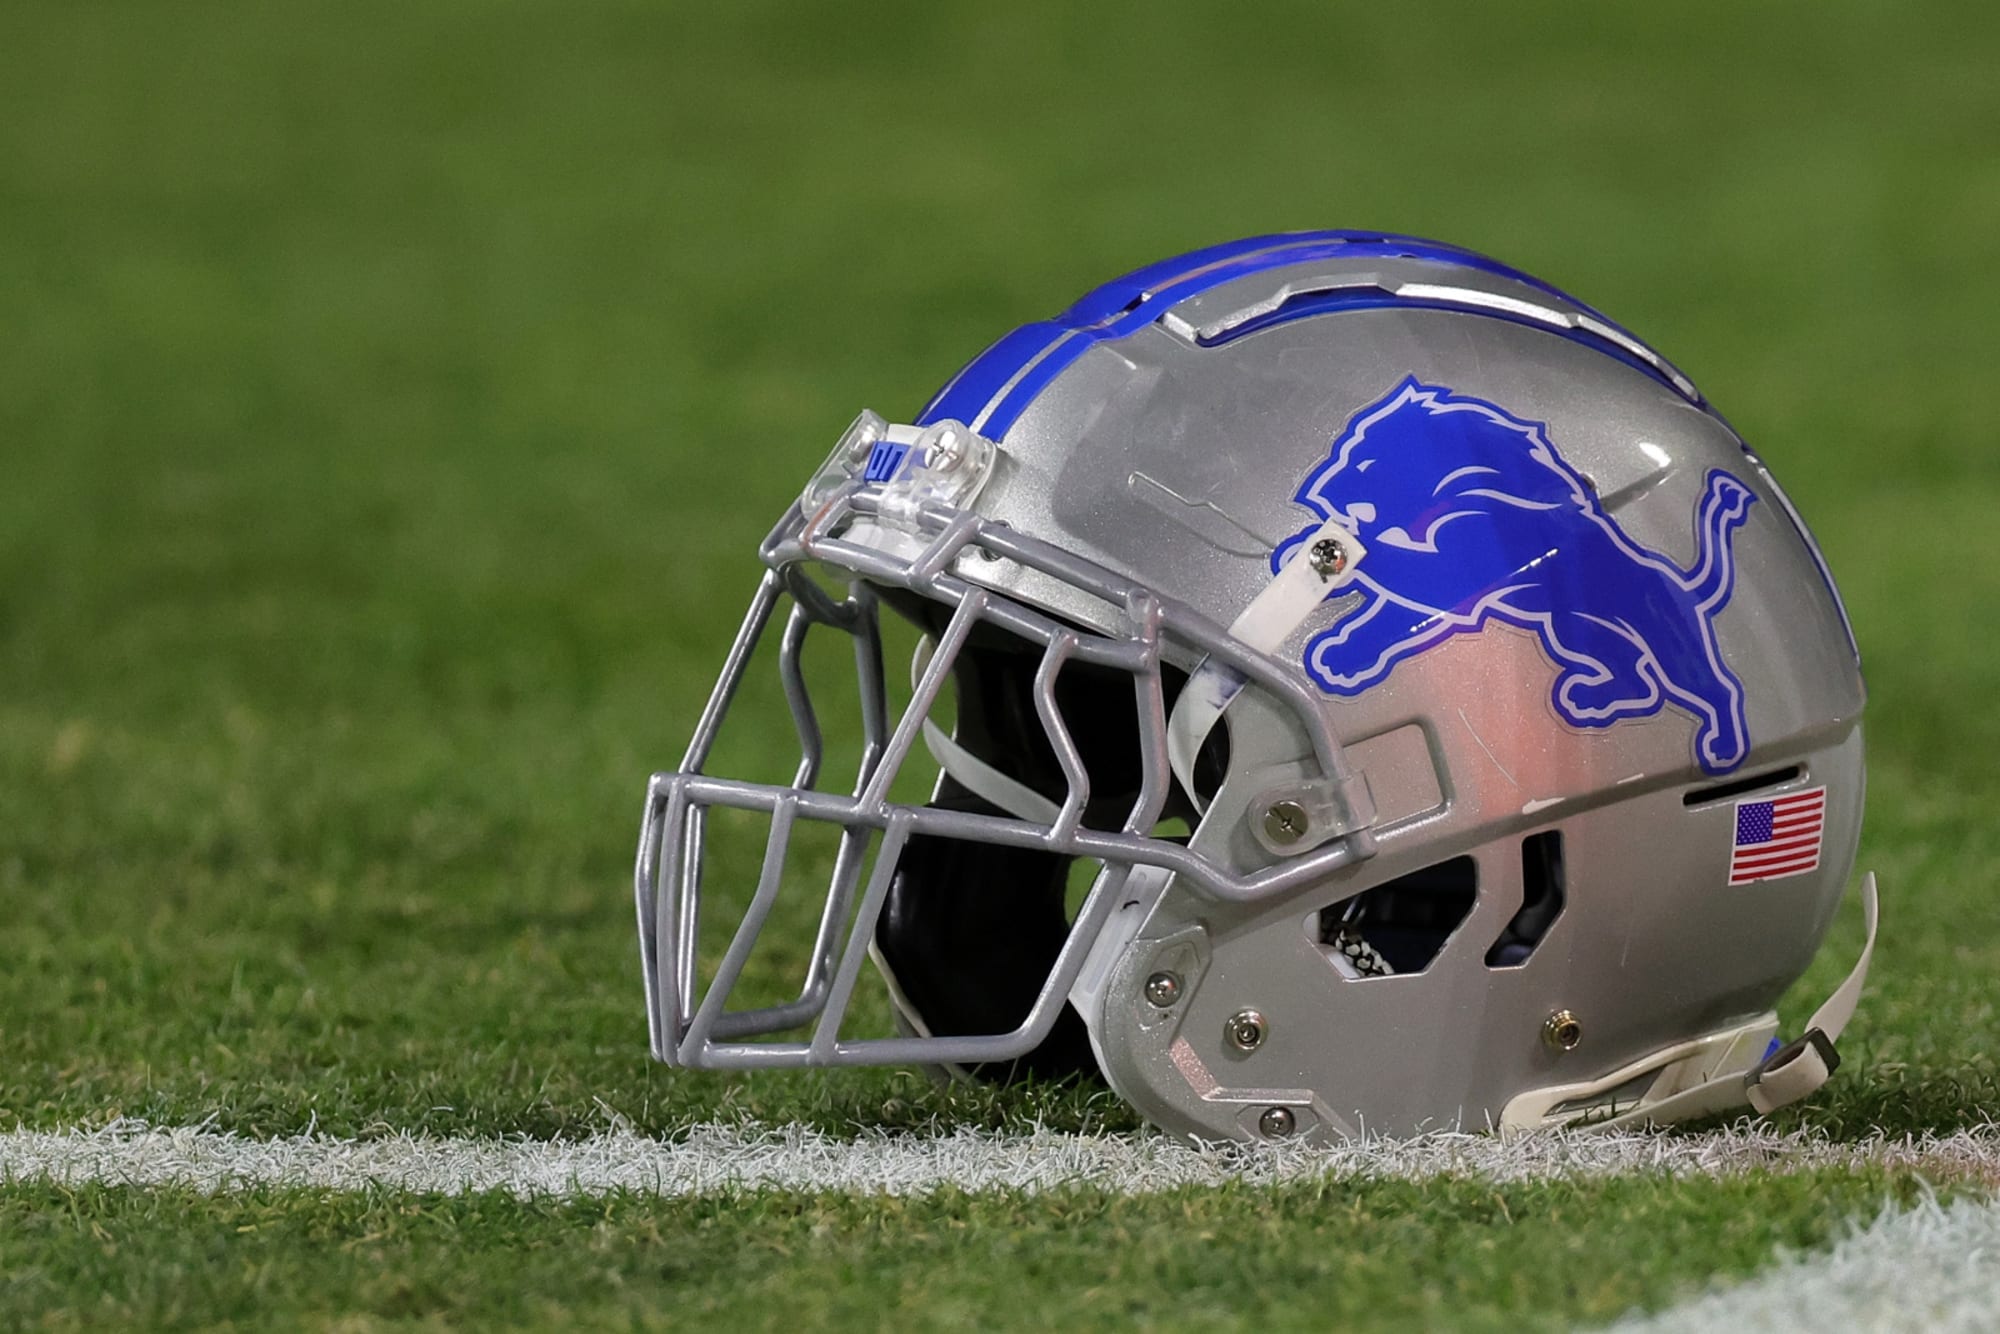 Fifth Detroit Lions player under investigation for gambling